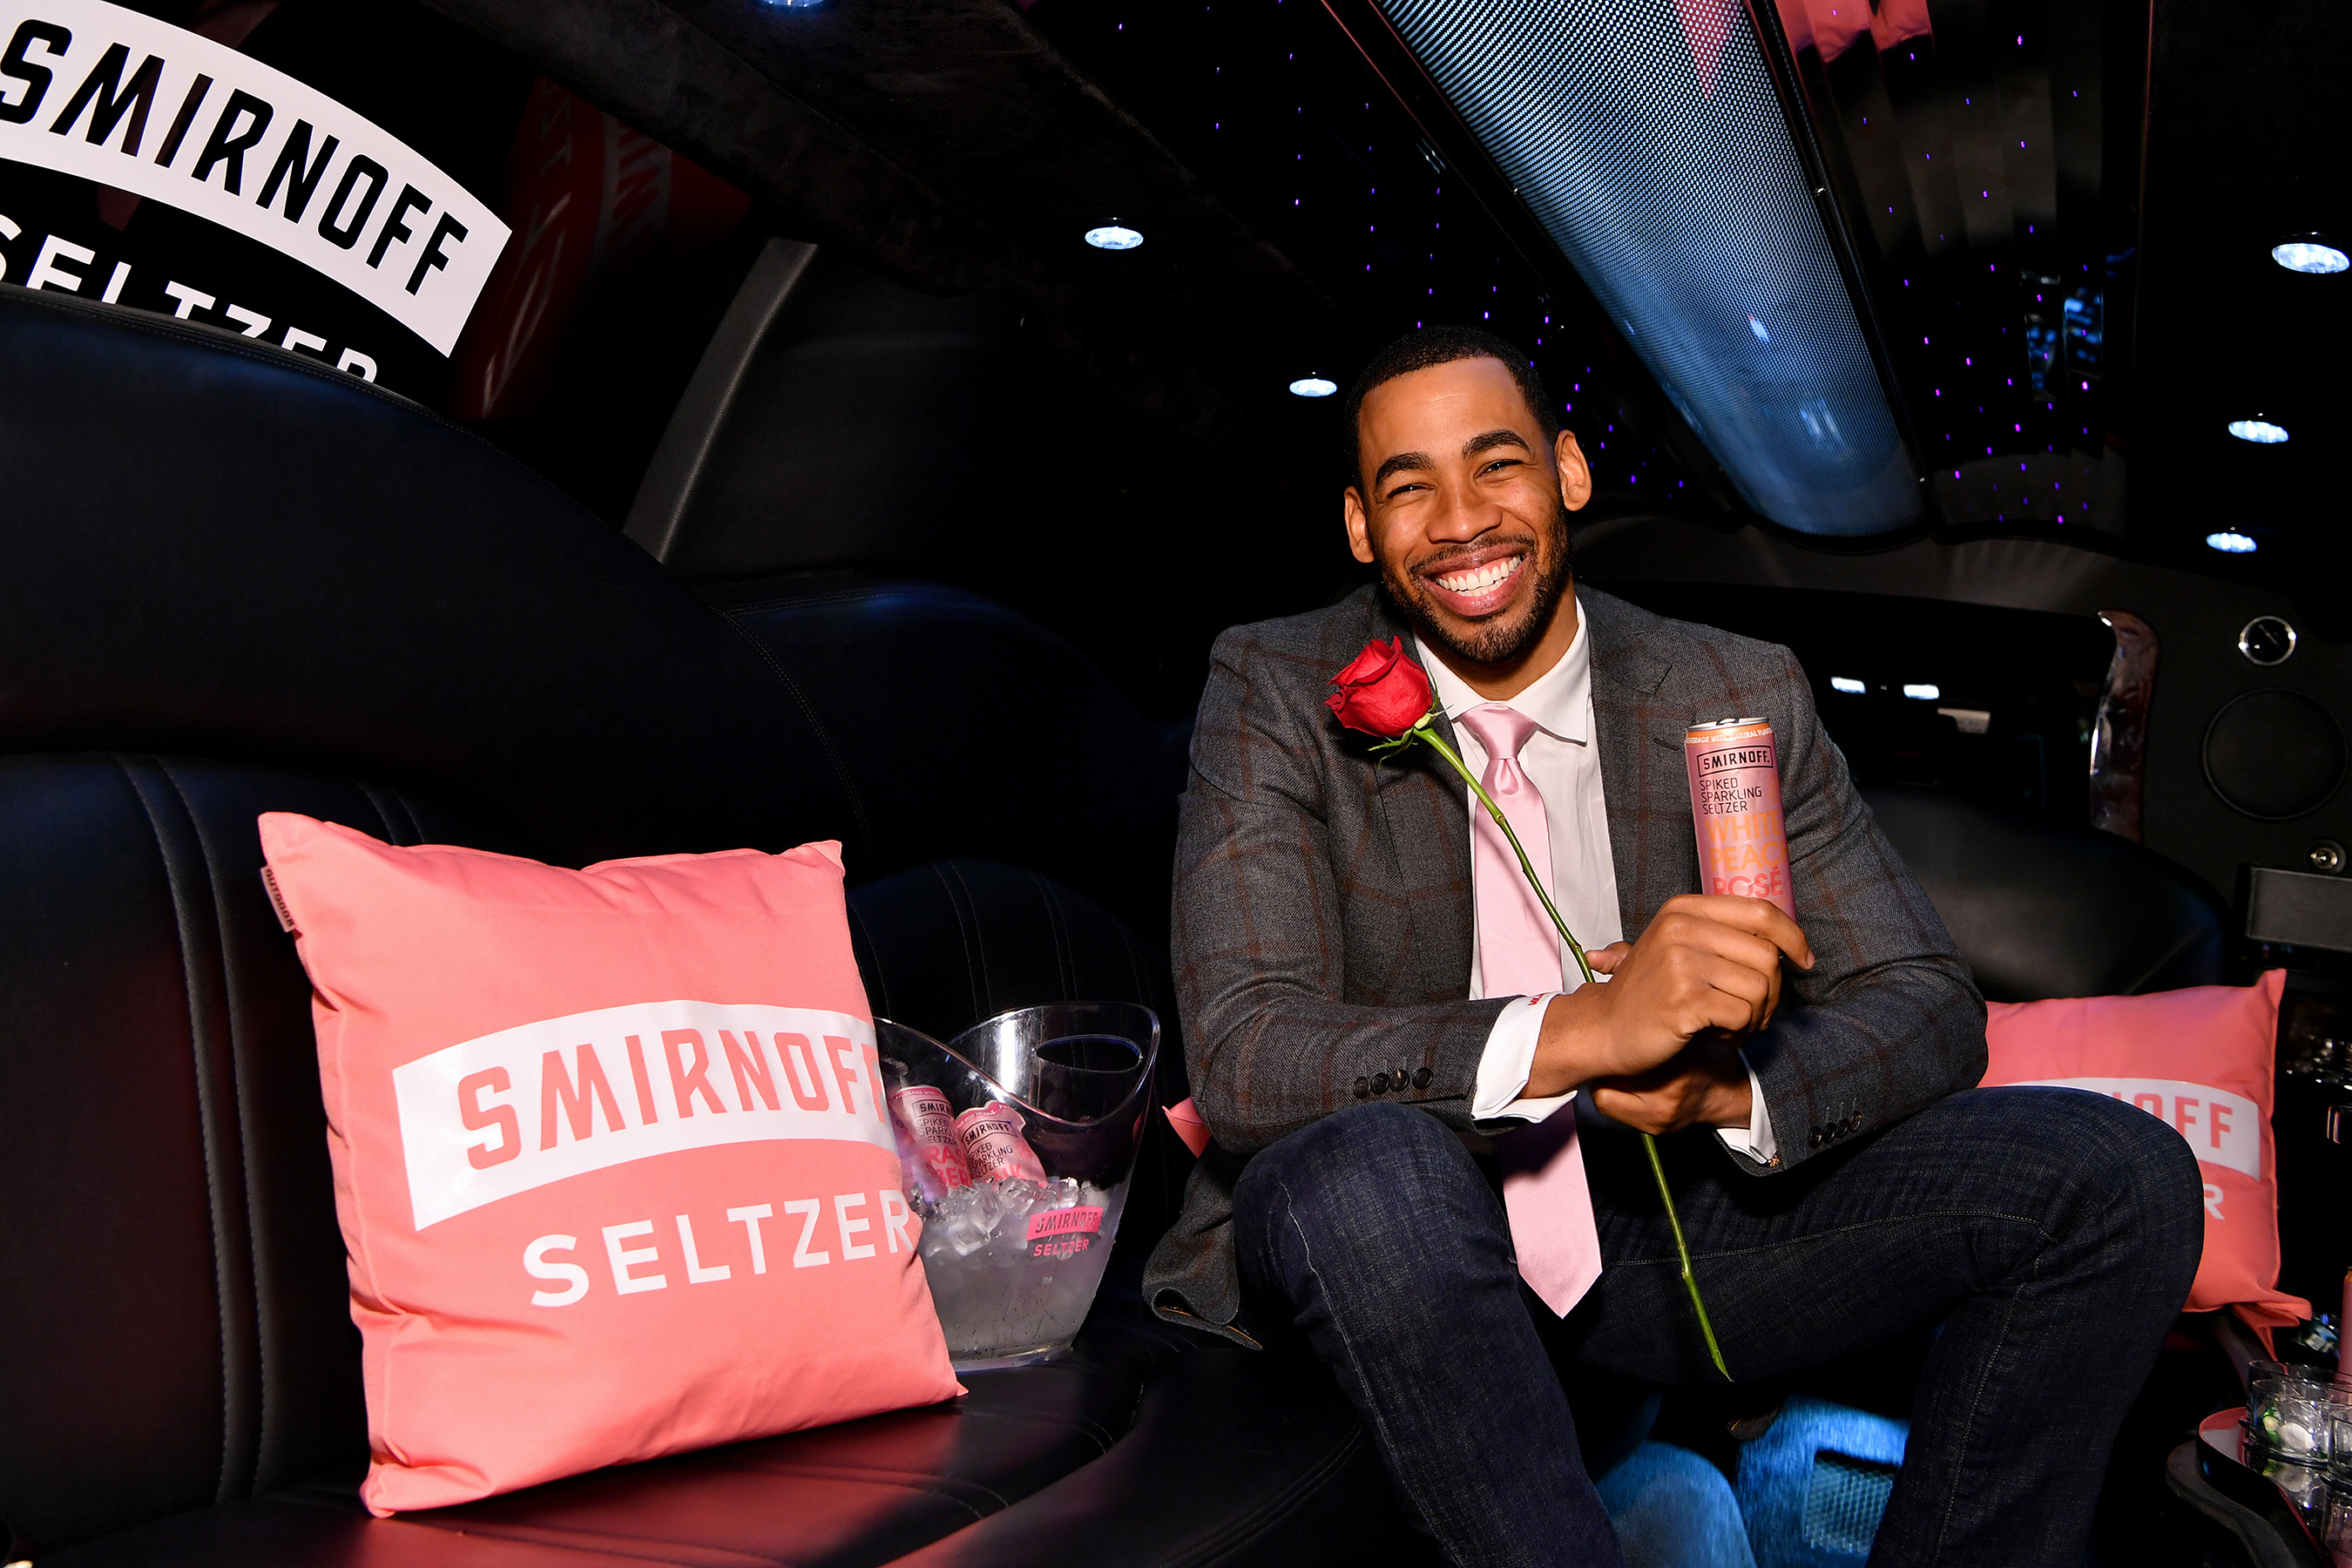 Smirnoff Seltzer and Mike Johnson toast with bar goers in Brooklyn to watch the latest episode of The Bachelor on Monday, January 13th.